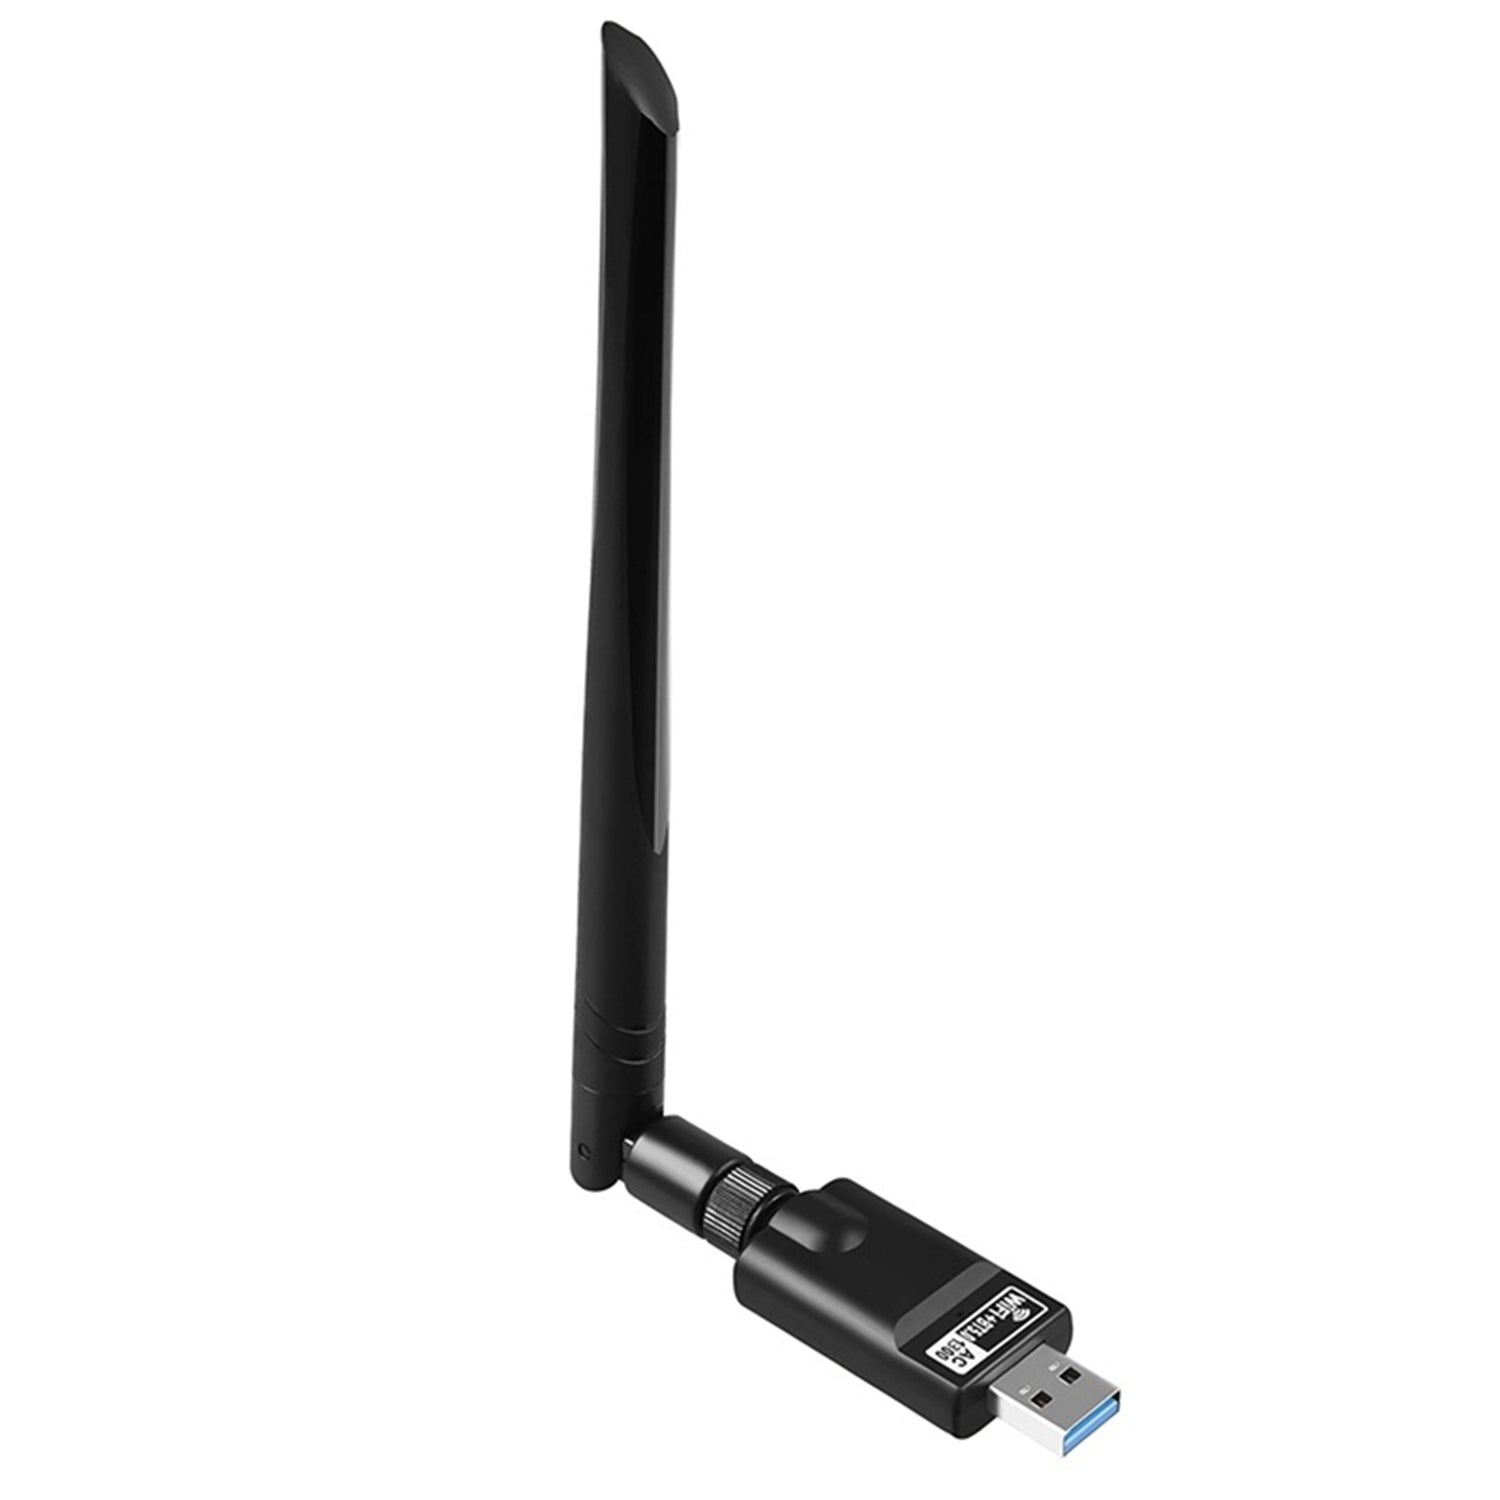 HAJAAN AC 1300Mbps Mini Wireless Wi-Fi Adapter | Dual Band 2.4GHz/5GHz | Bluetooth 5.0 | High-Gain 5dBi Antenna - Suitable for Desktop PC, Laptops